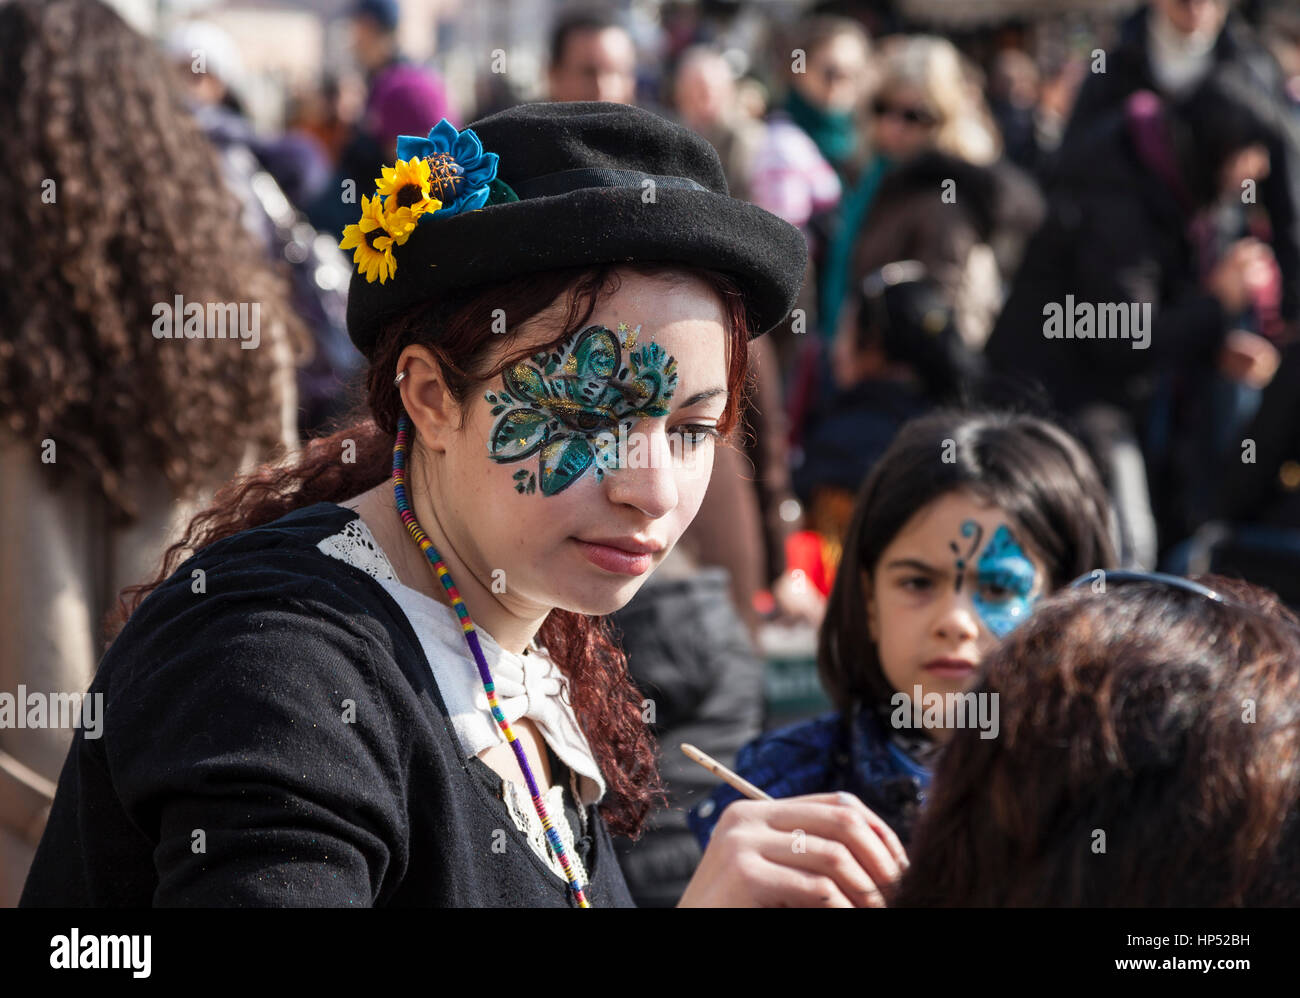 Venice,Italy-February 26, 2011: Environmental portrait of a female street face painter working on Sestiere Castello in Venice during the Venice carniv Stock Photo